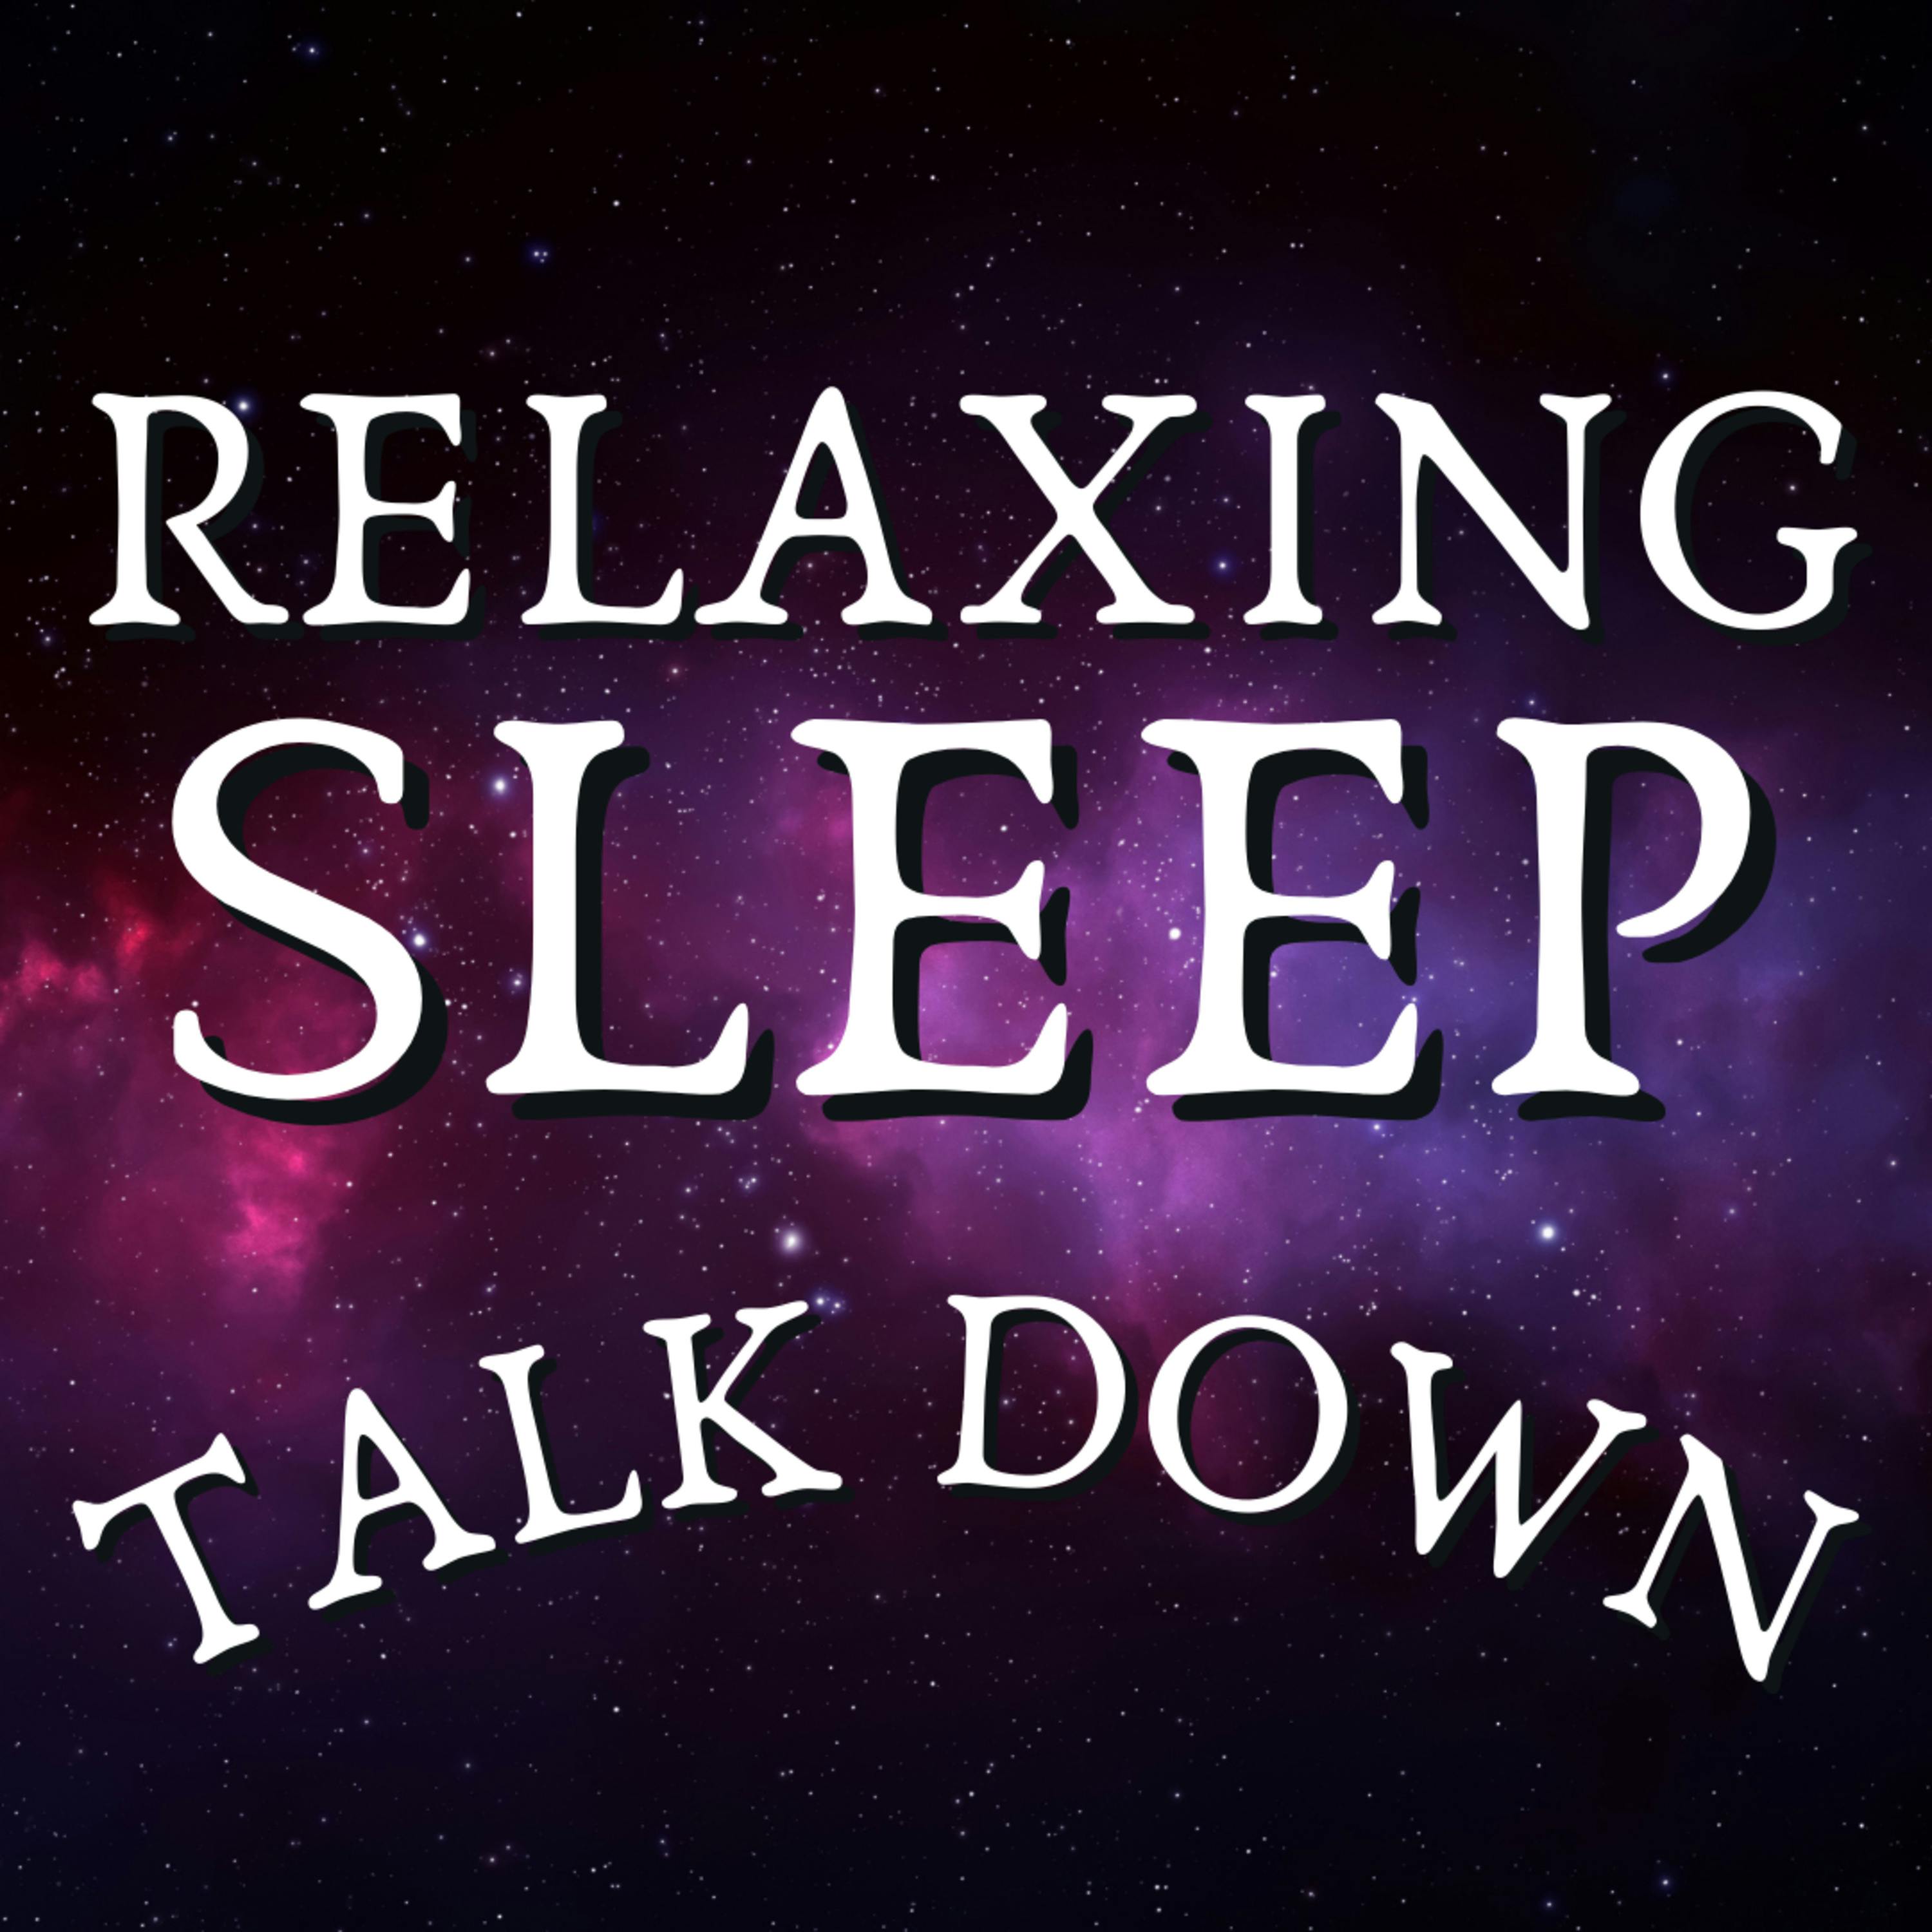 Sleep Talk Down Guided Meditation to Clear Anxiety and Stress